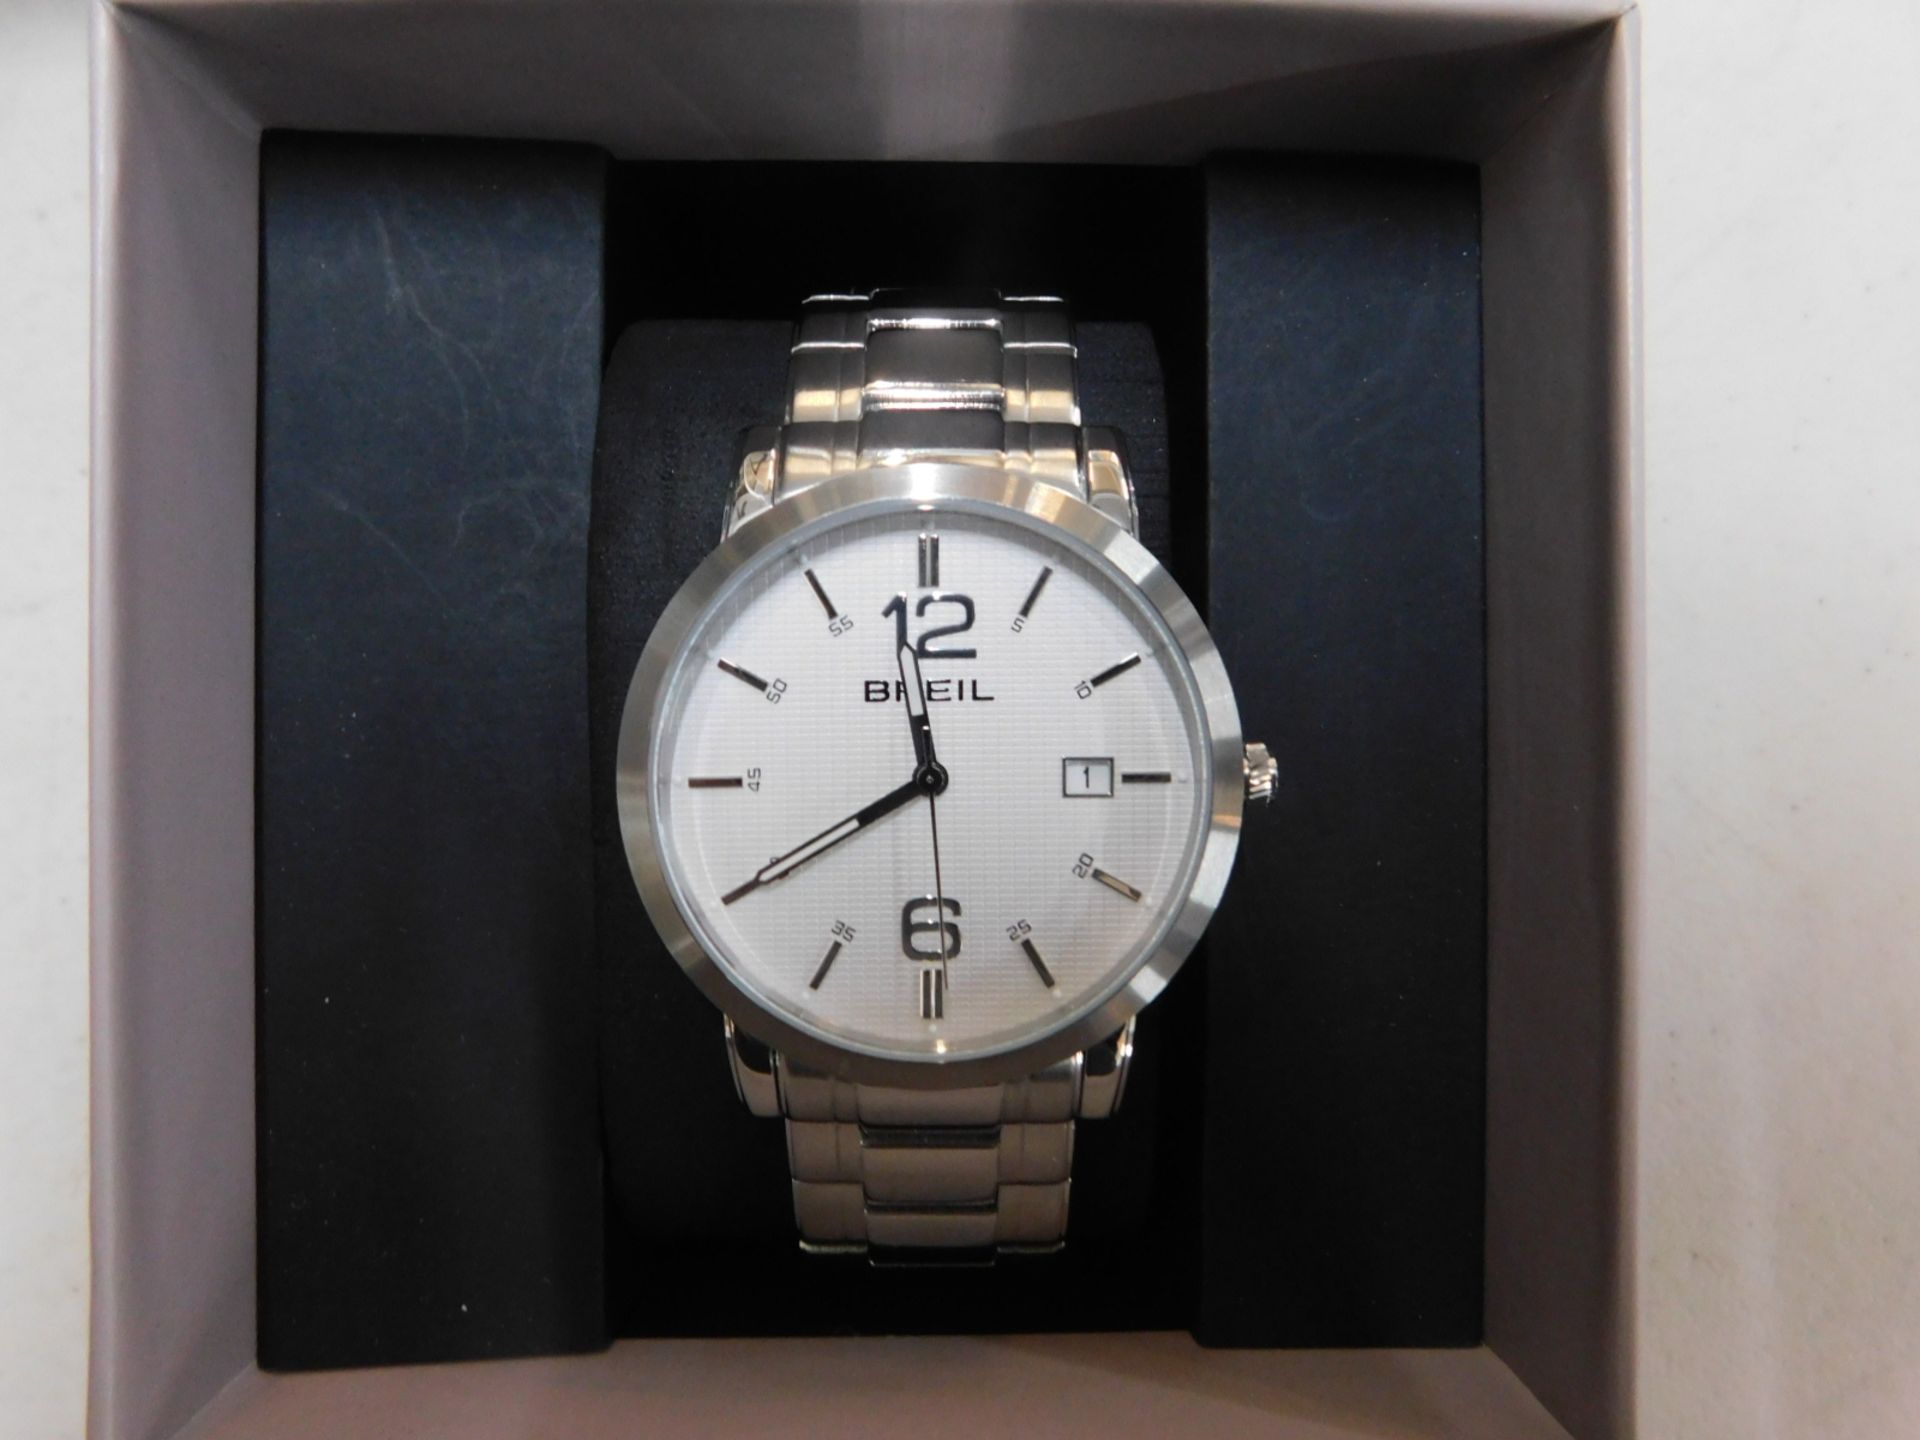 1 BOXED BREIL MOMENTO GENTS WATCH MODEL TW1456 RRP Â£99